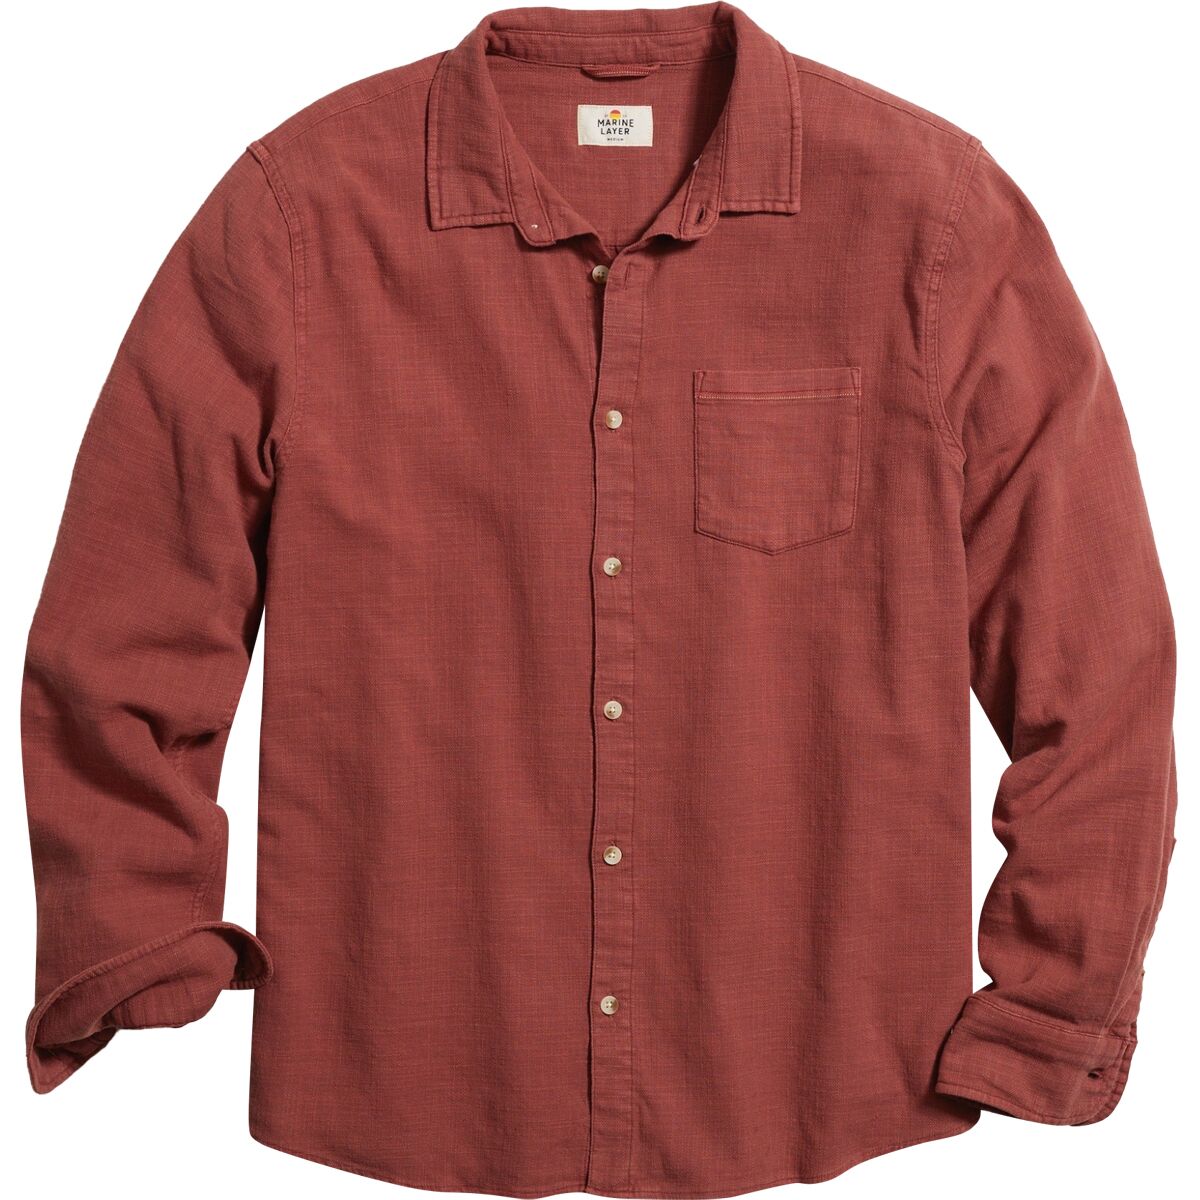 Marine Layer Long-Sleeve Classic Stretch Selvage Shirt - Men's